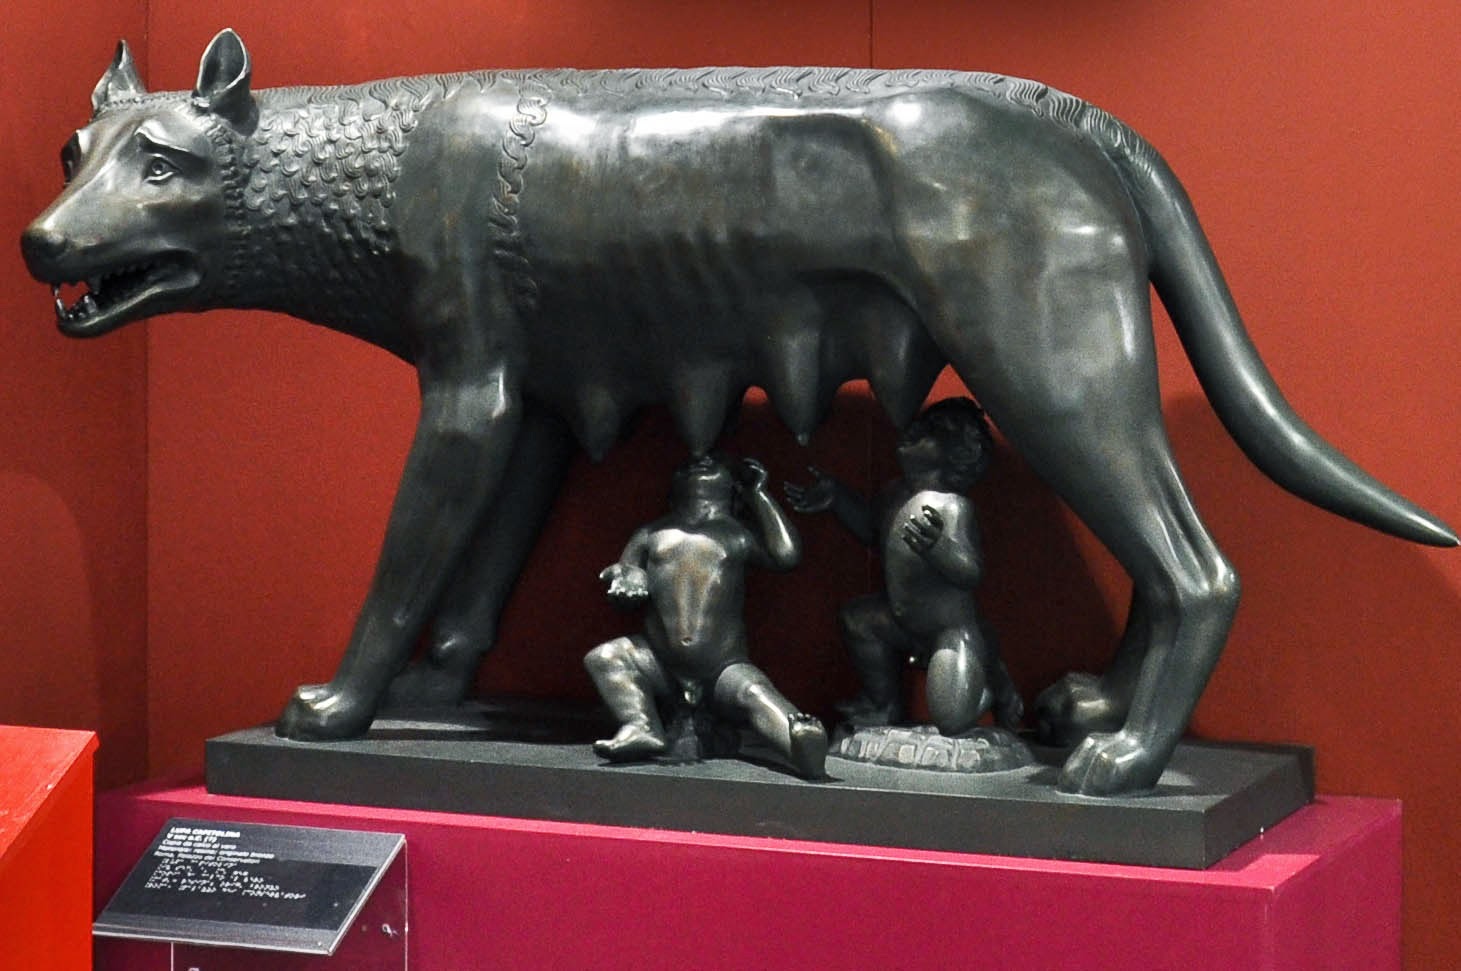 A statue from the Tactile State Museum Omero in Ancona at Move! travel exhibition in Vicenza